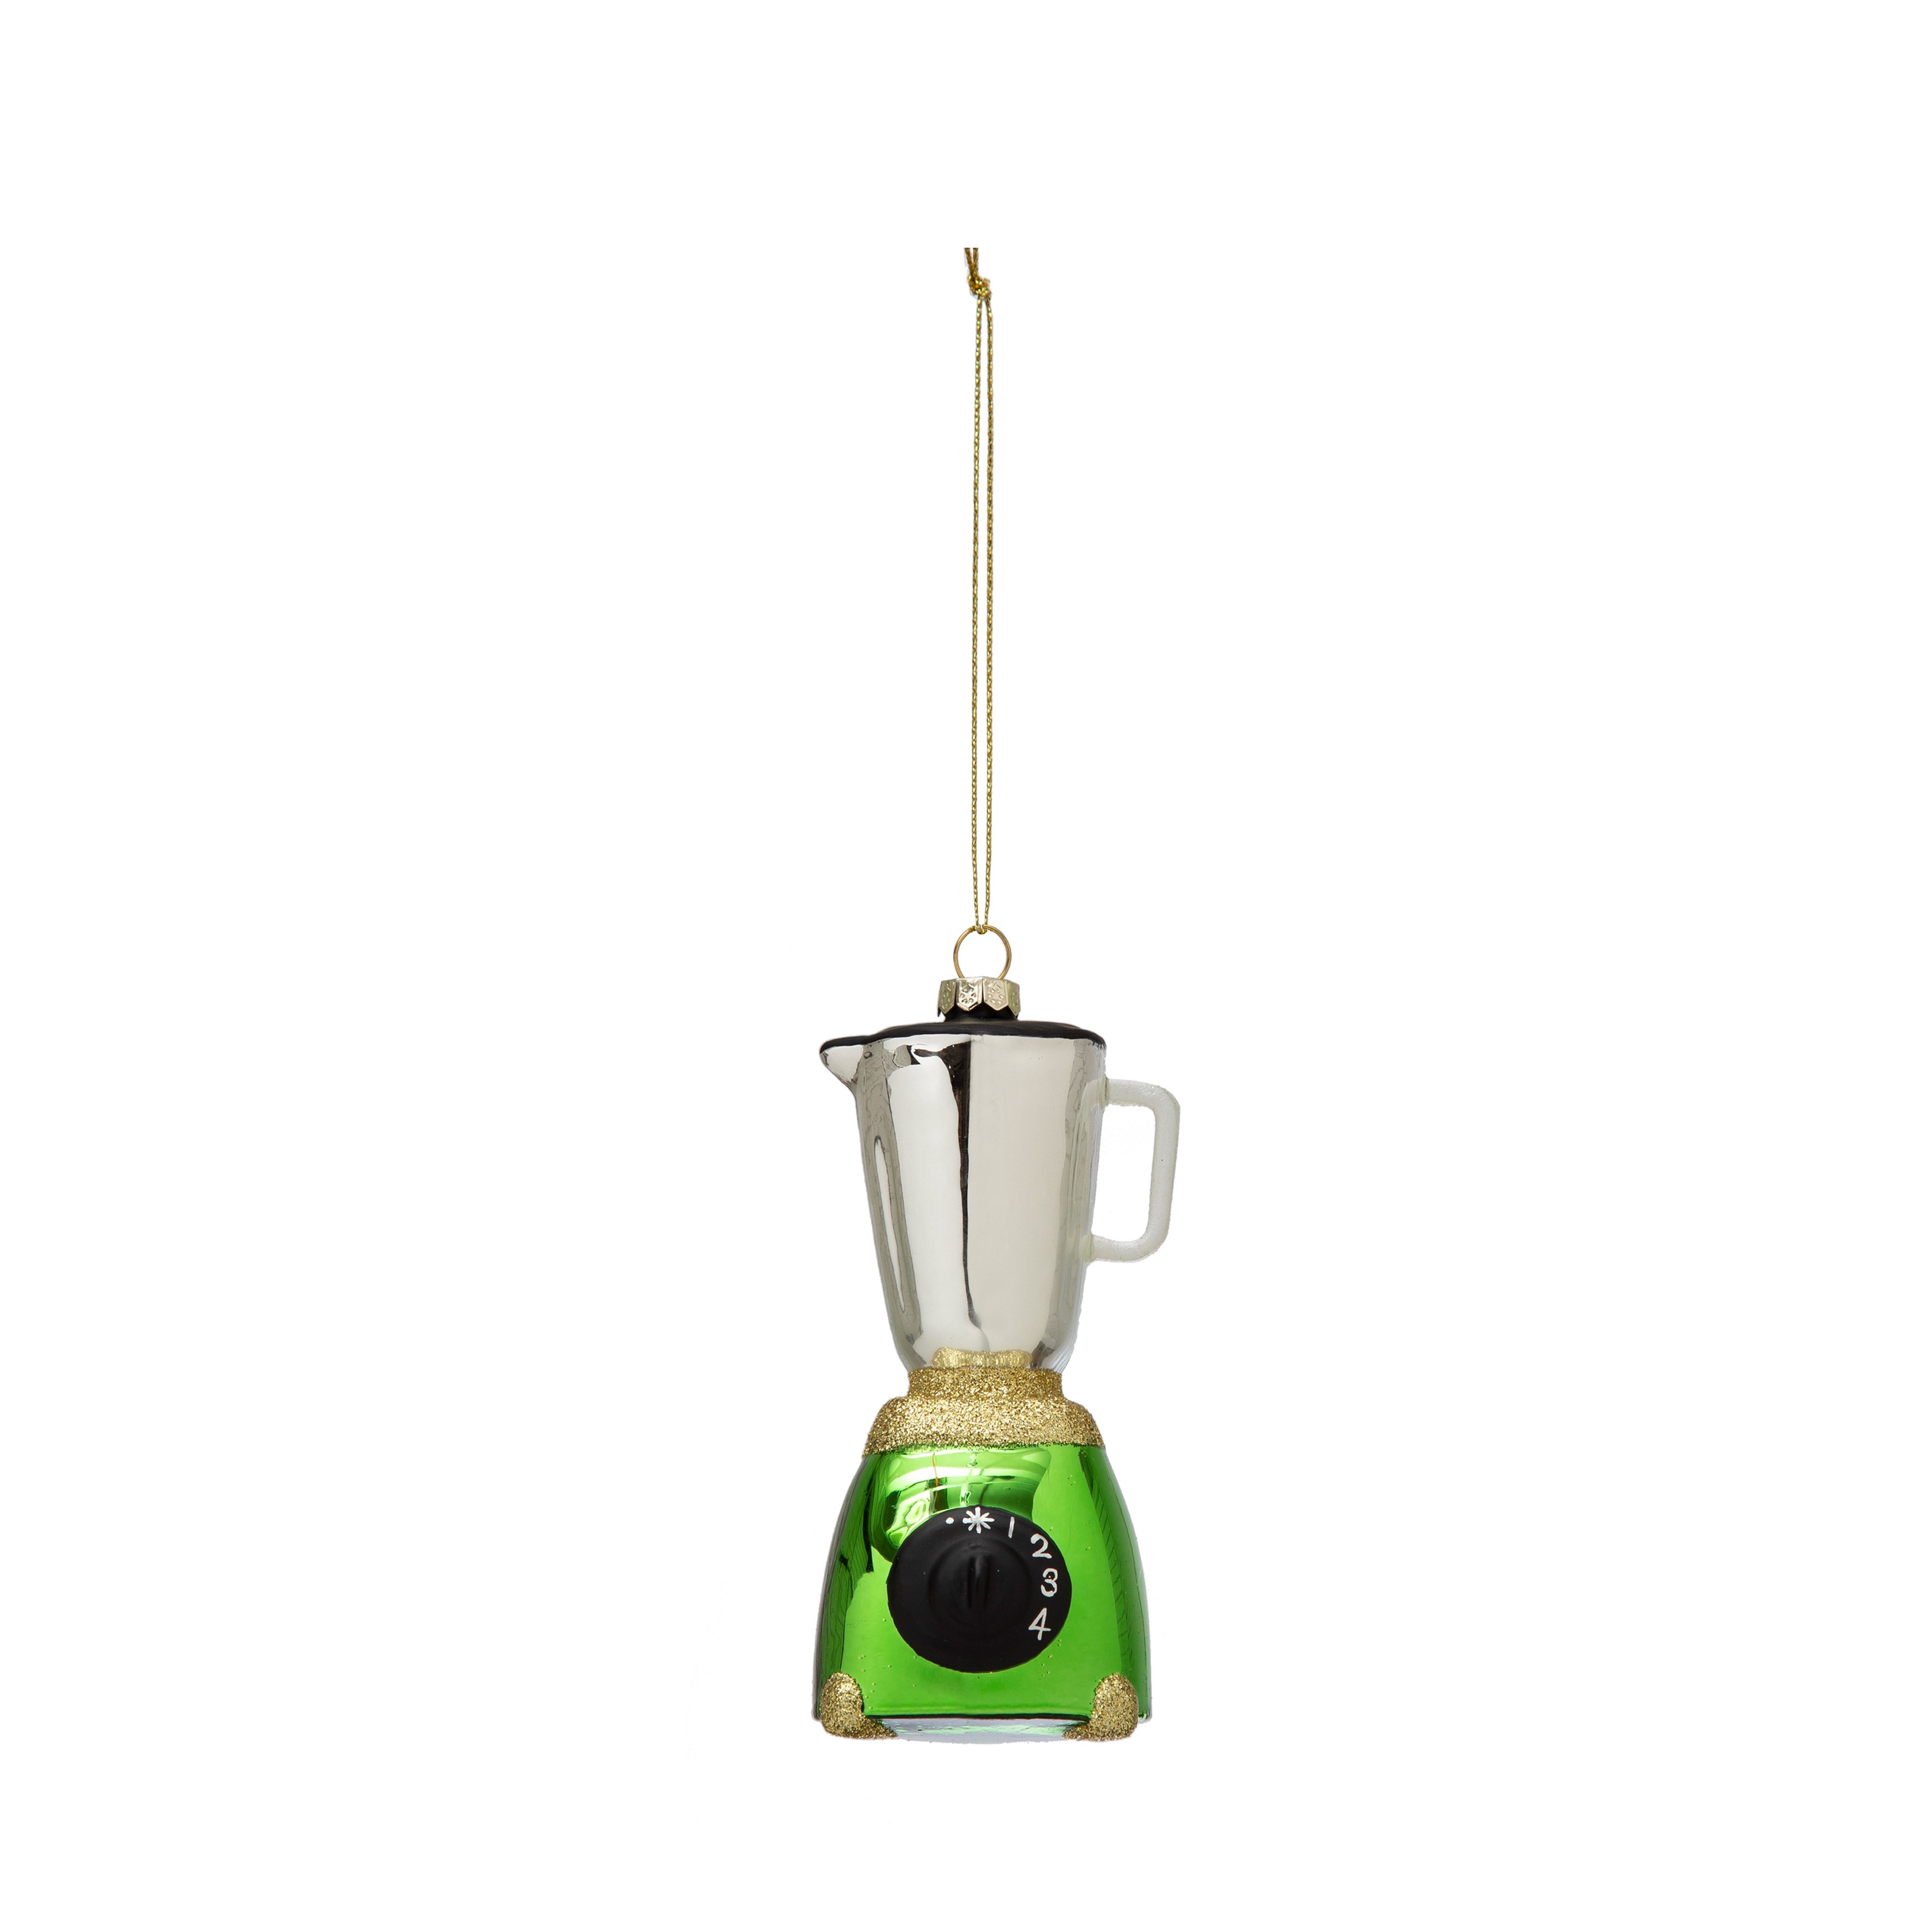 Hand-Painted Glass Blender Ornament with Glitter - 2.1L x 2.4W x 5.1H -  On Sale - Bed Bath & Beyond - 38881893